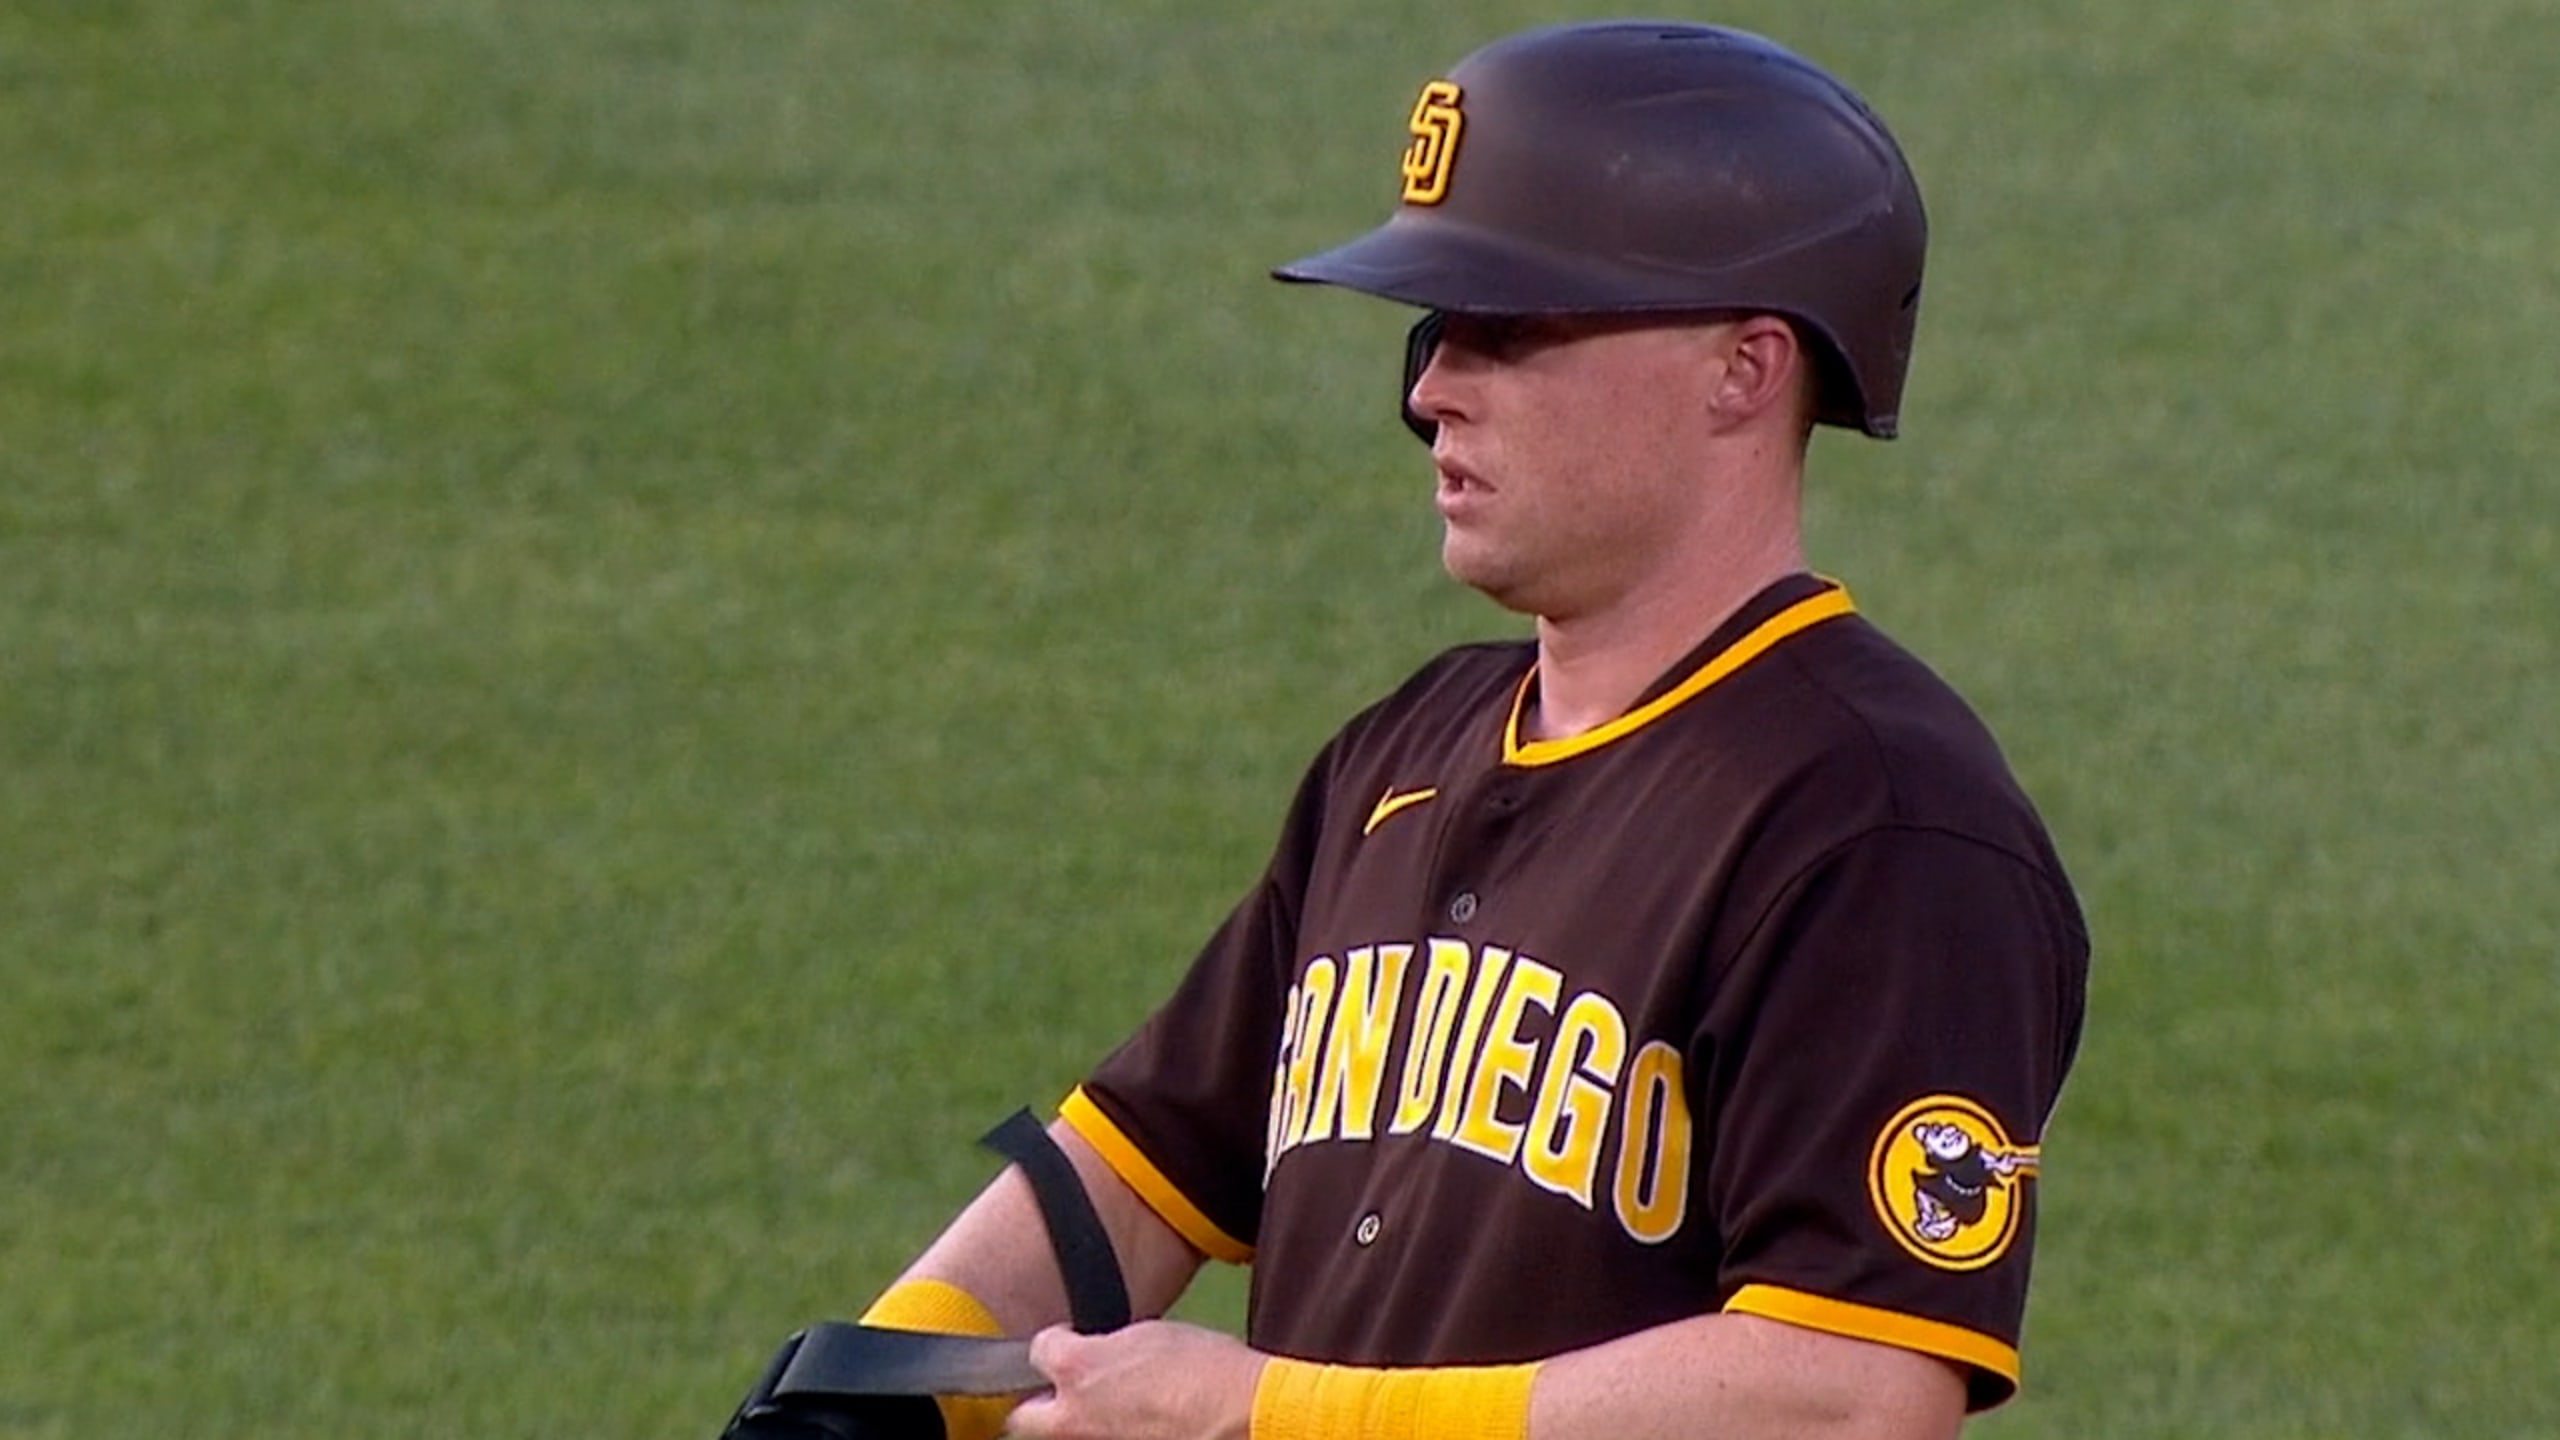 WATCH: St. Clair native Jake Cronenworth hits for the cycle